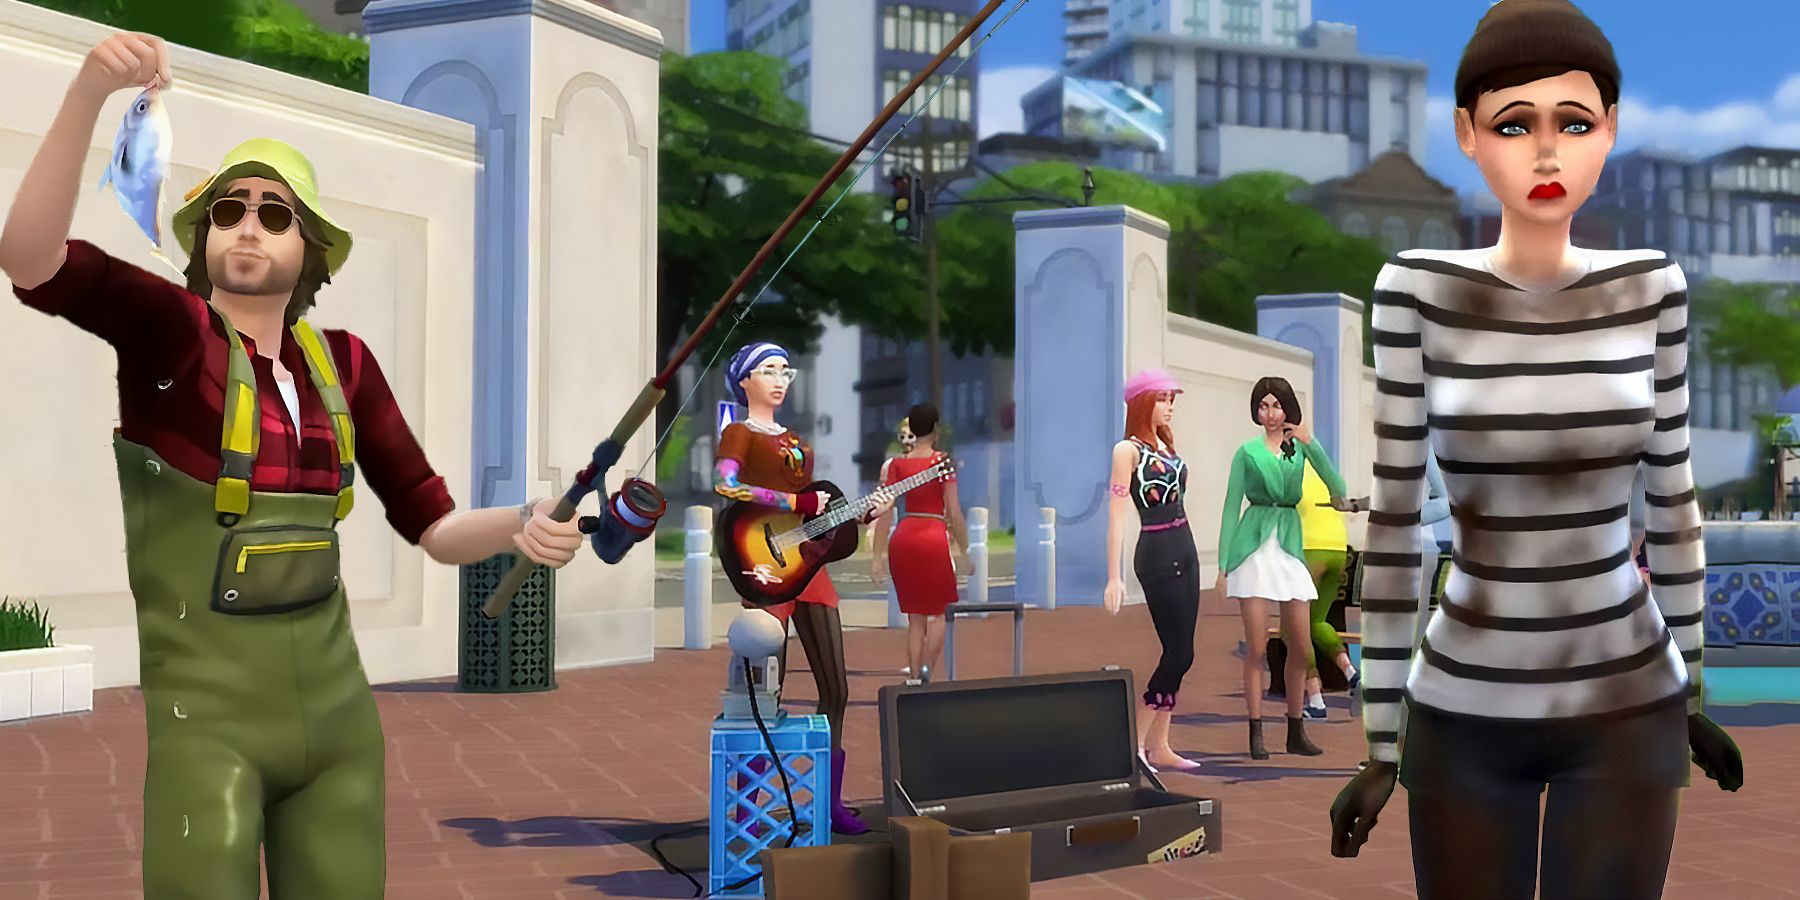 The Sims 4: How To Make Money (Without Resorting To Cheats)